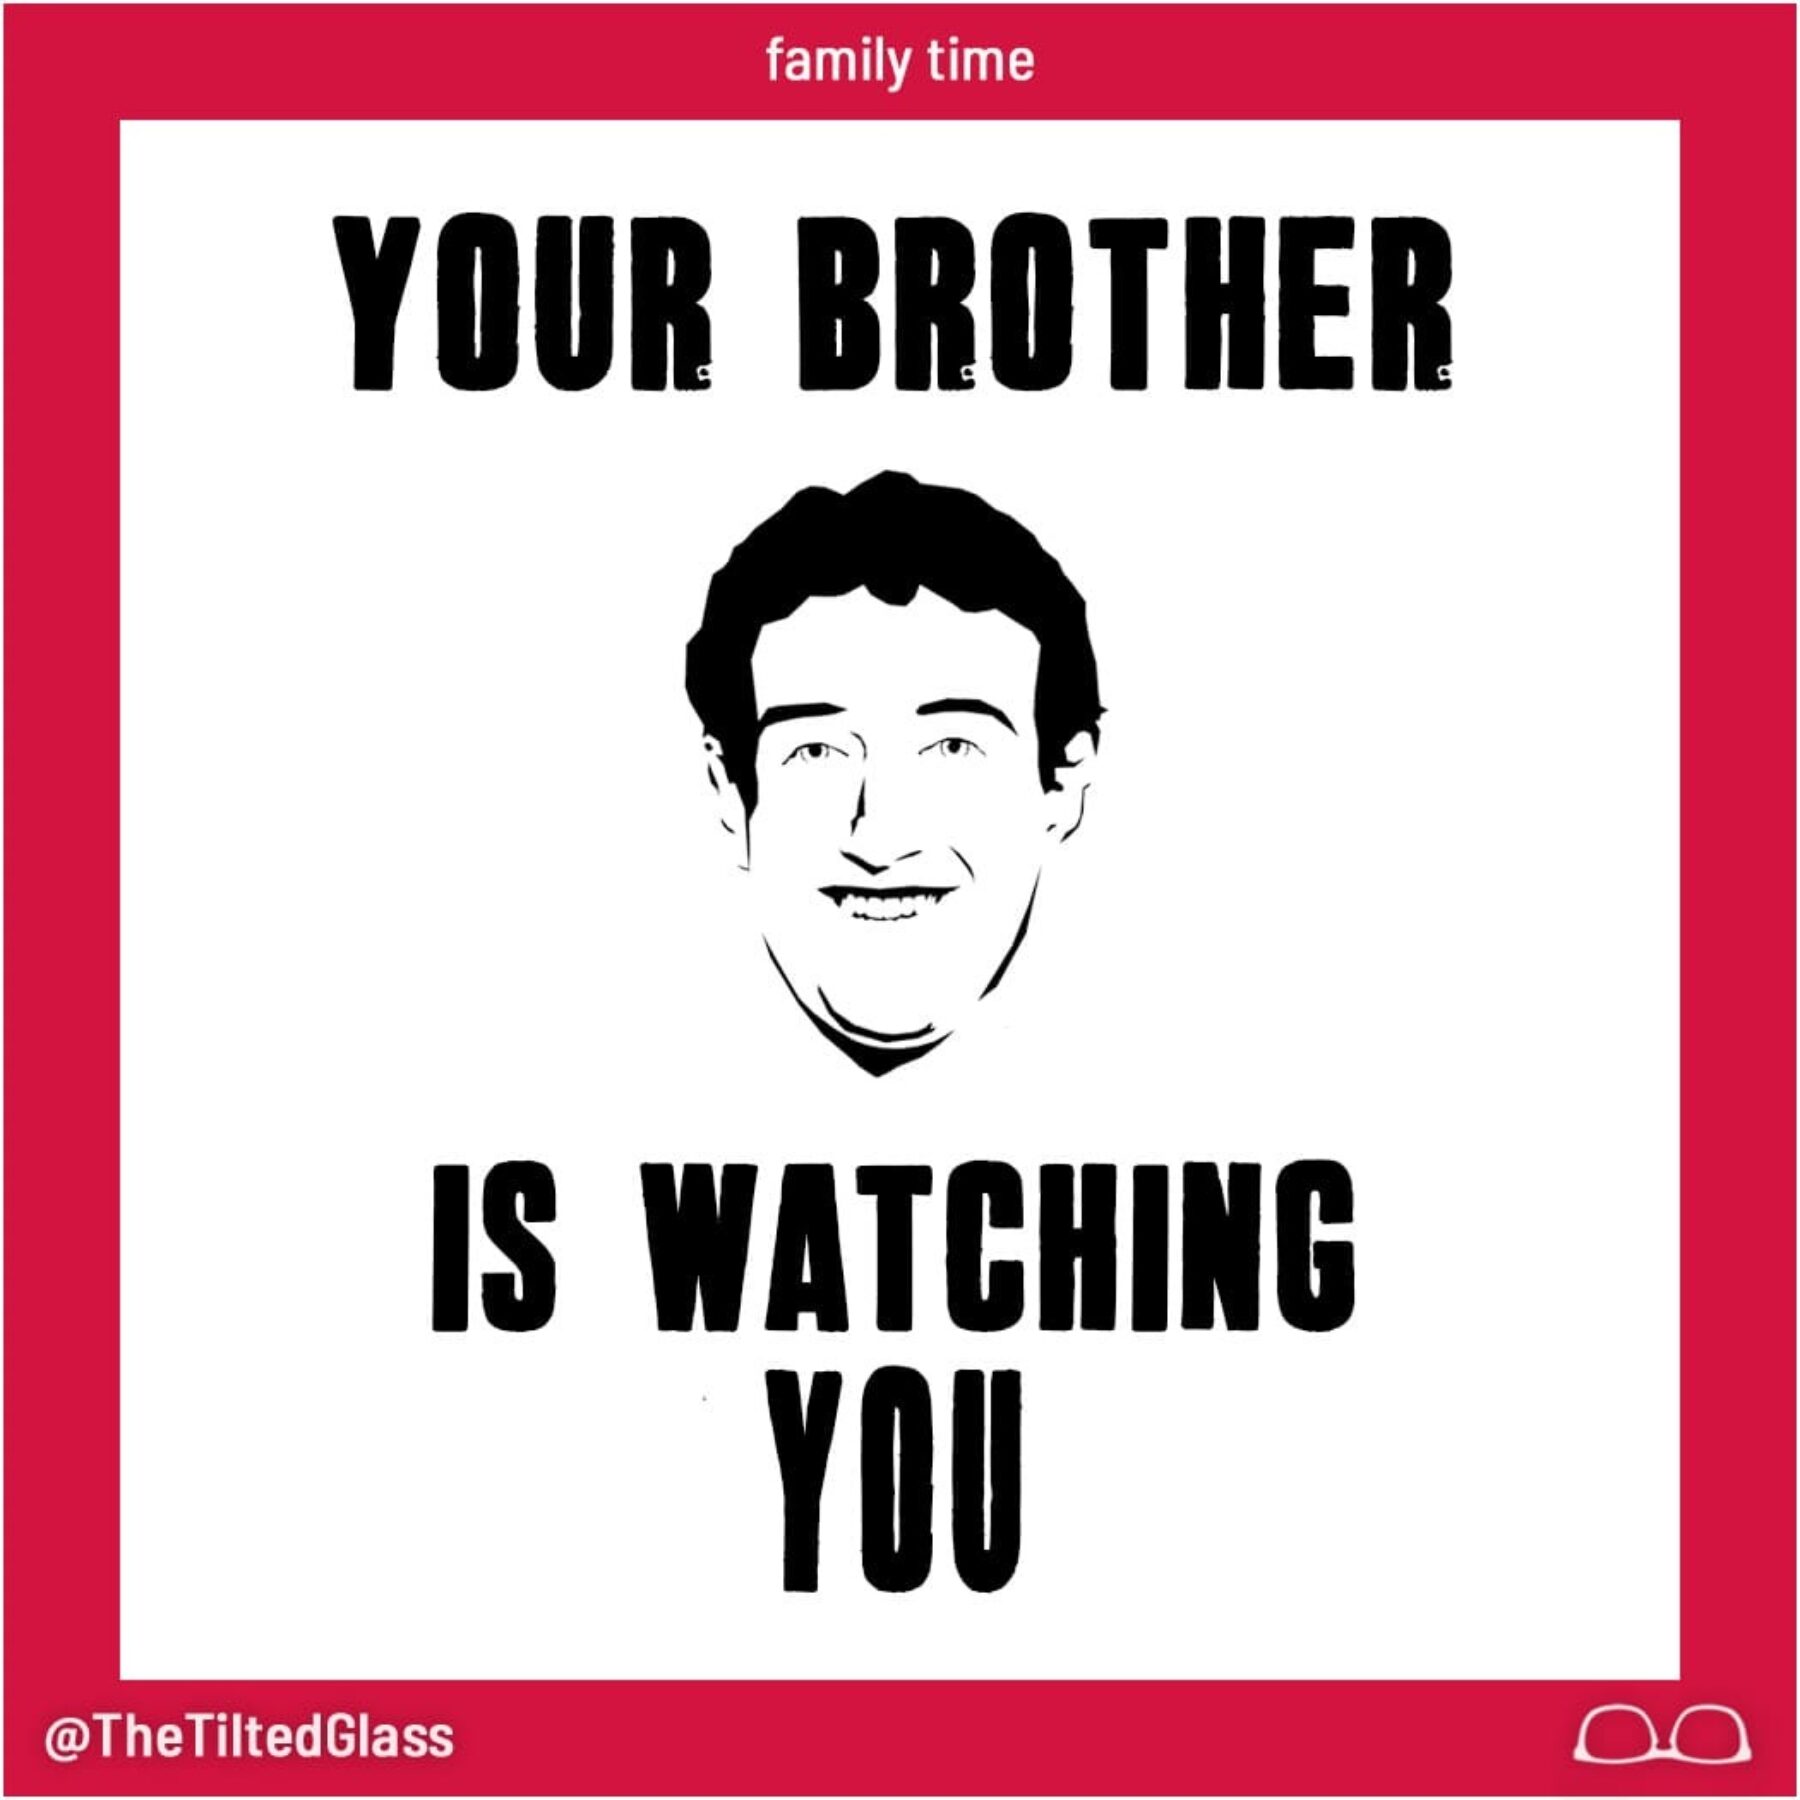 Your Brother is Watching You